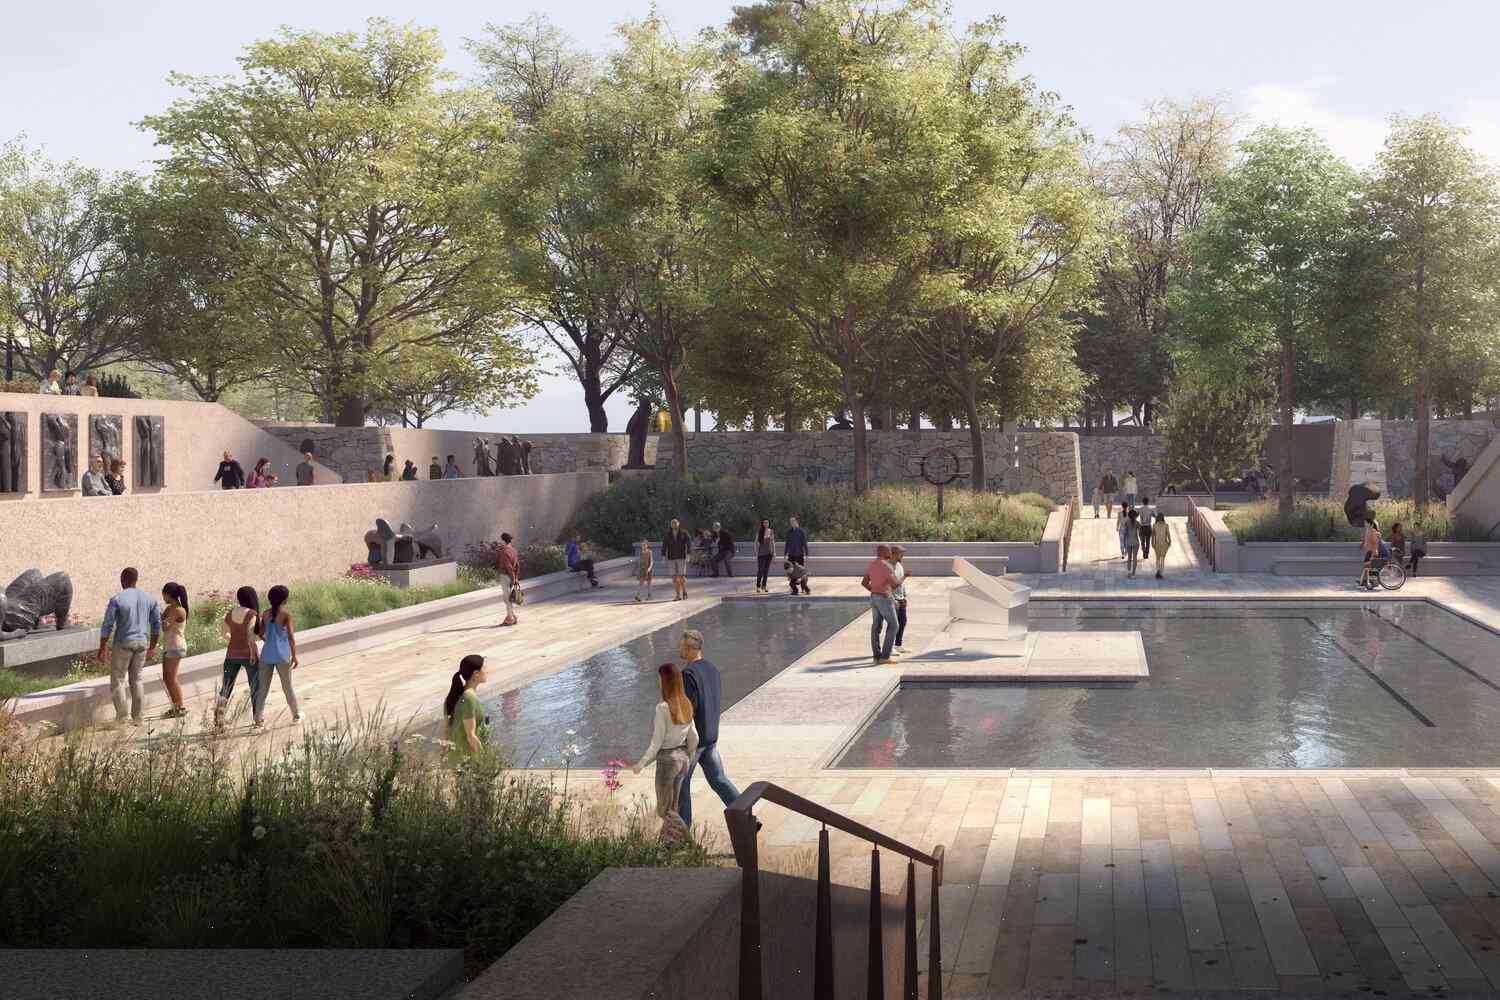 Presentation of the Hirschhorn Sculpture Park’s Renovation Plans and Redesign